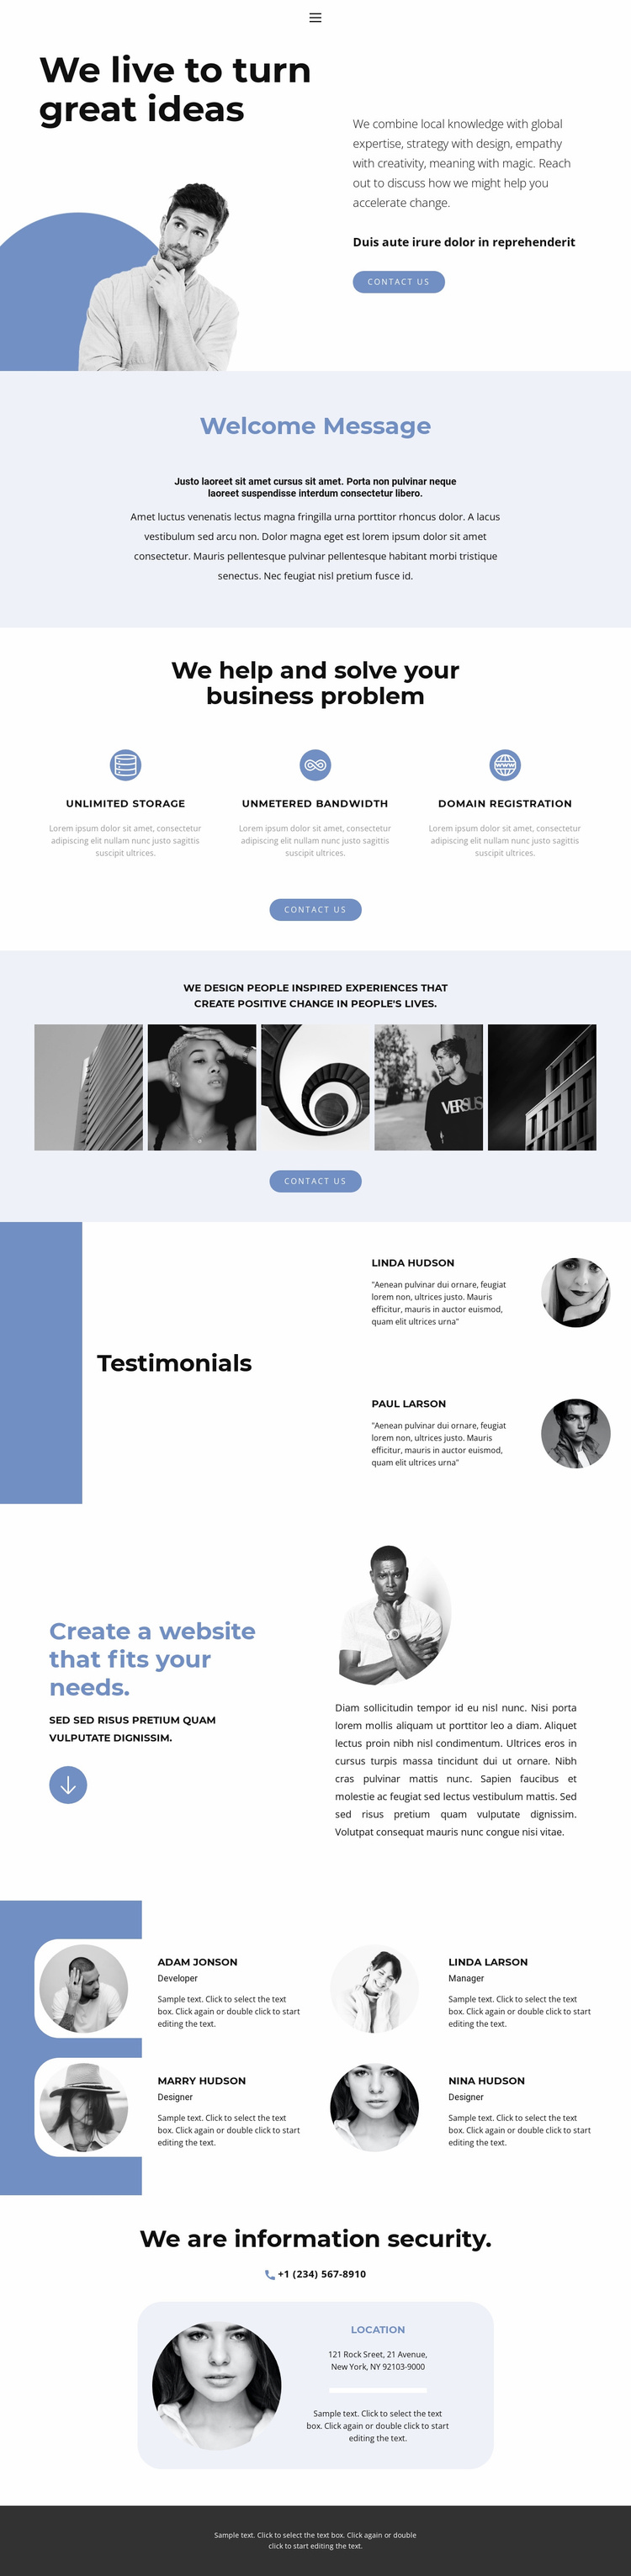 The embodiment of bold ideas eCommerce Template